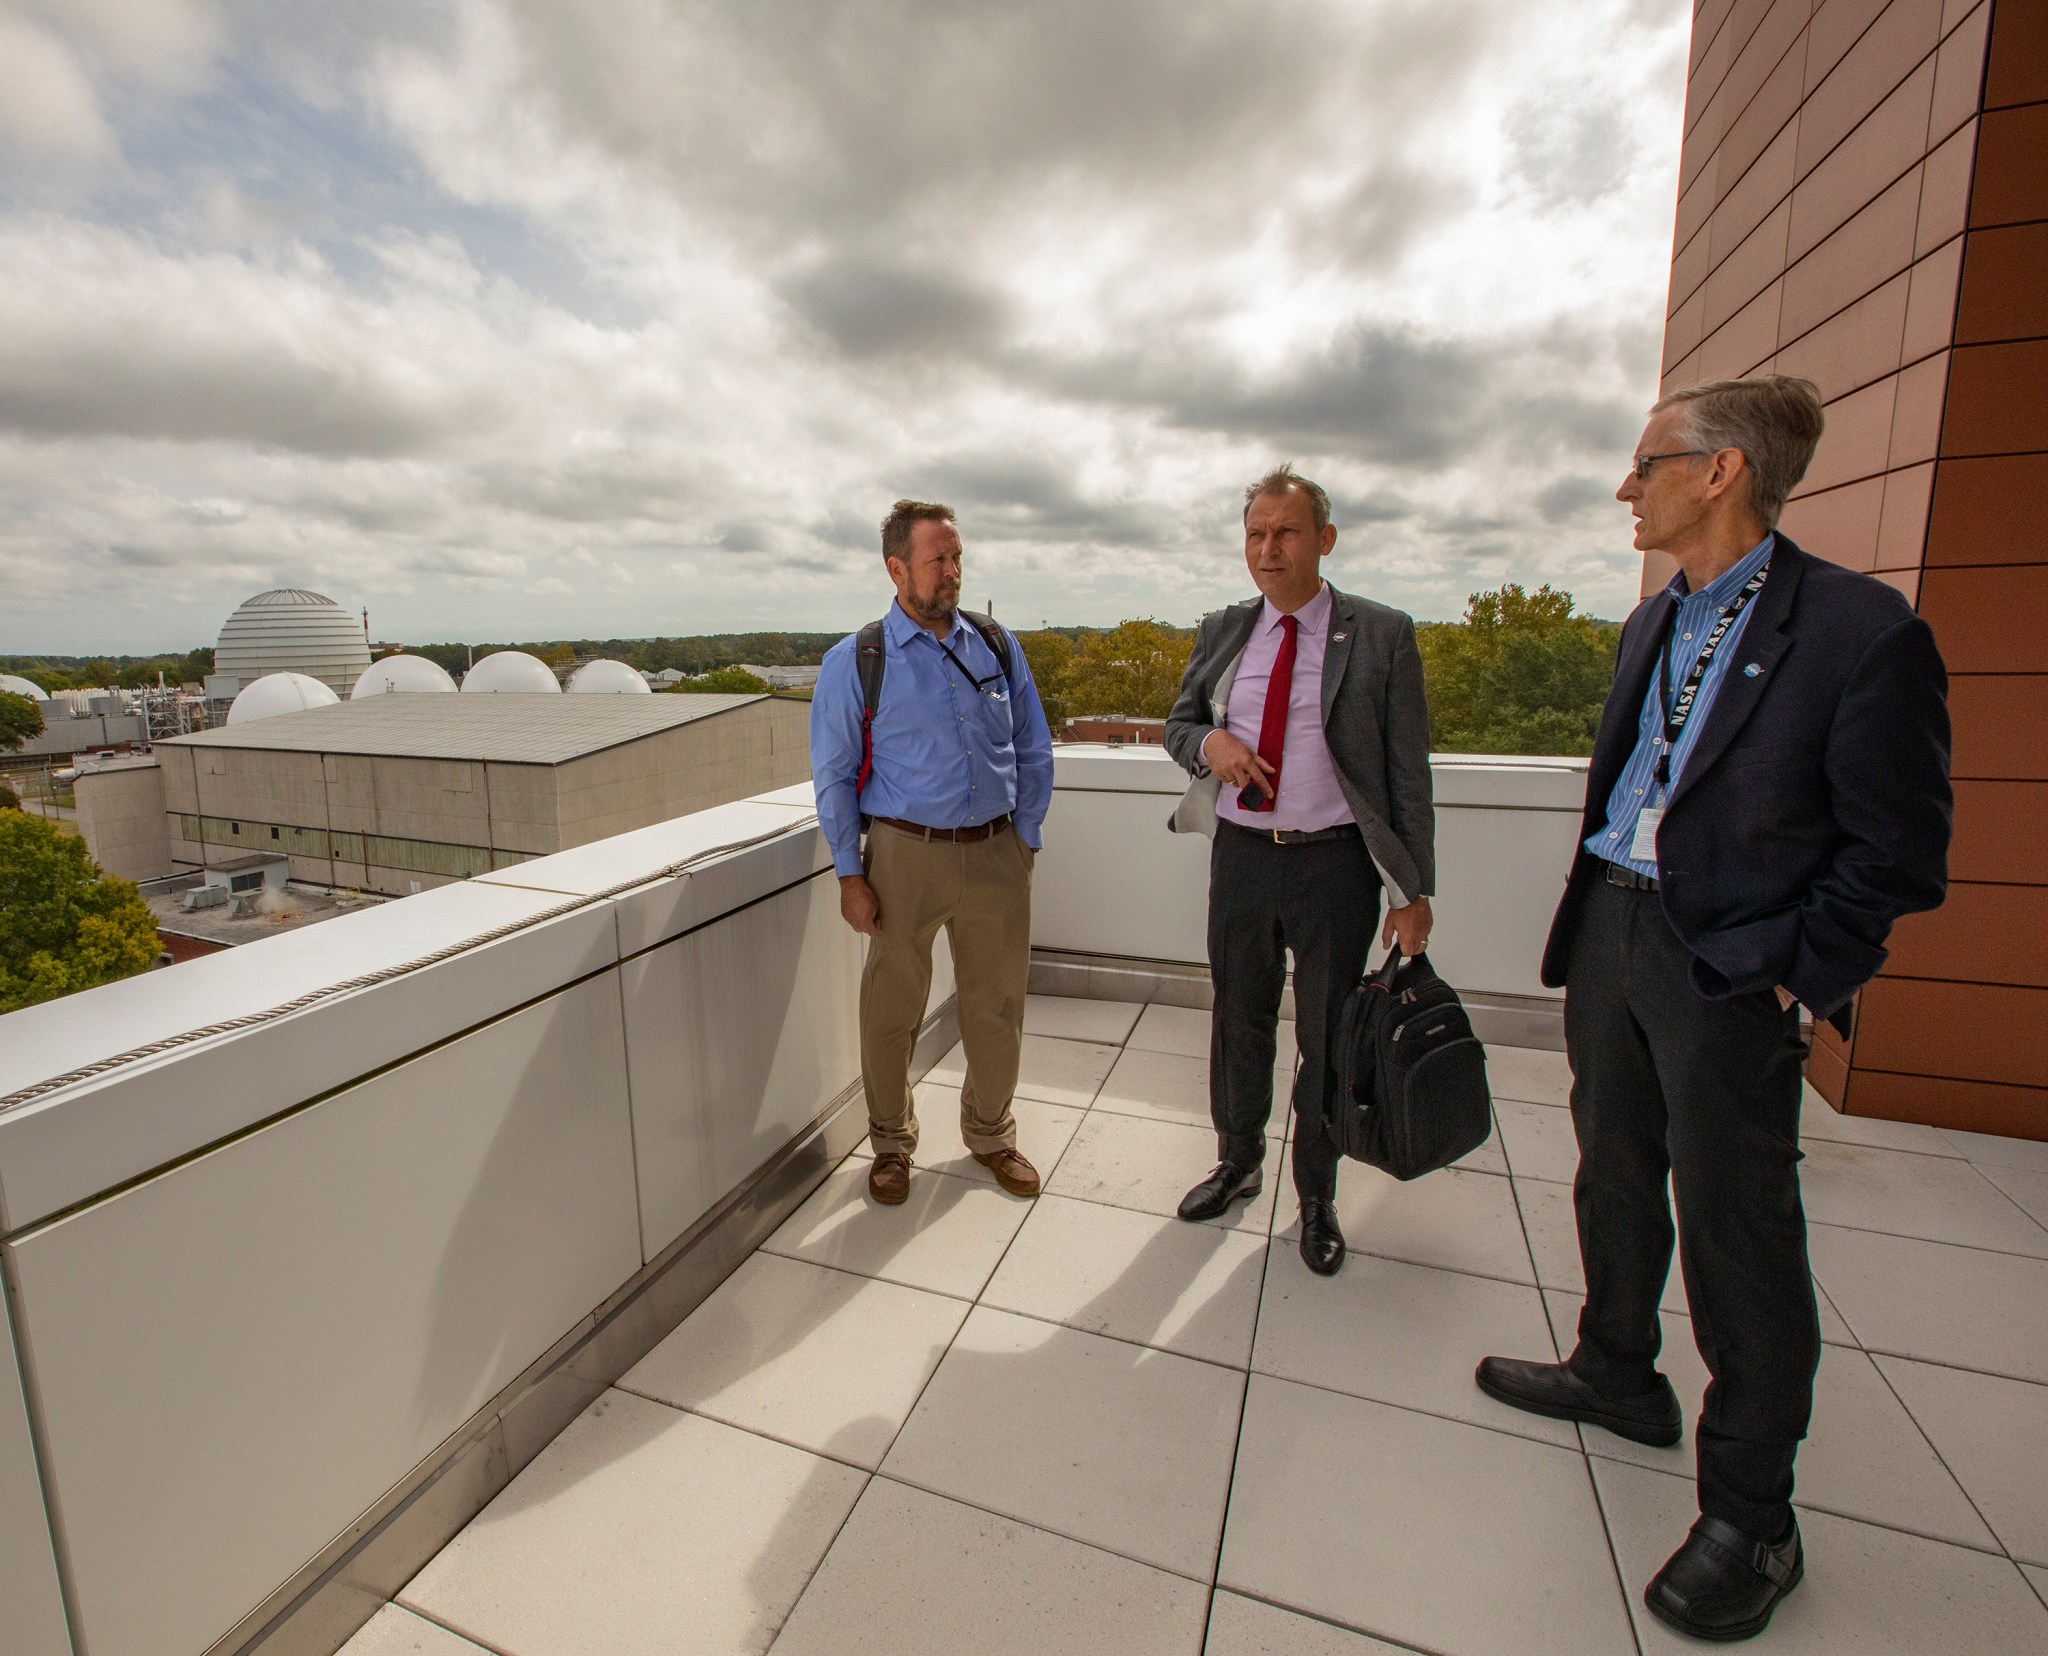 Dr. Thomas Zurbuchen visits the rooftop lab at the Measurement Systems Laboratory along with Langley's Acting Deputy Director for Flight Projects David MacDonnell, left, and Langley Deputy Center Director David Young, right.